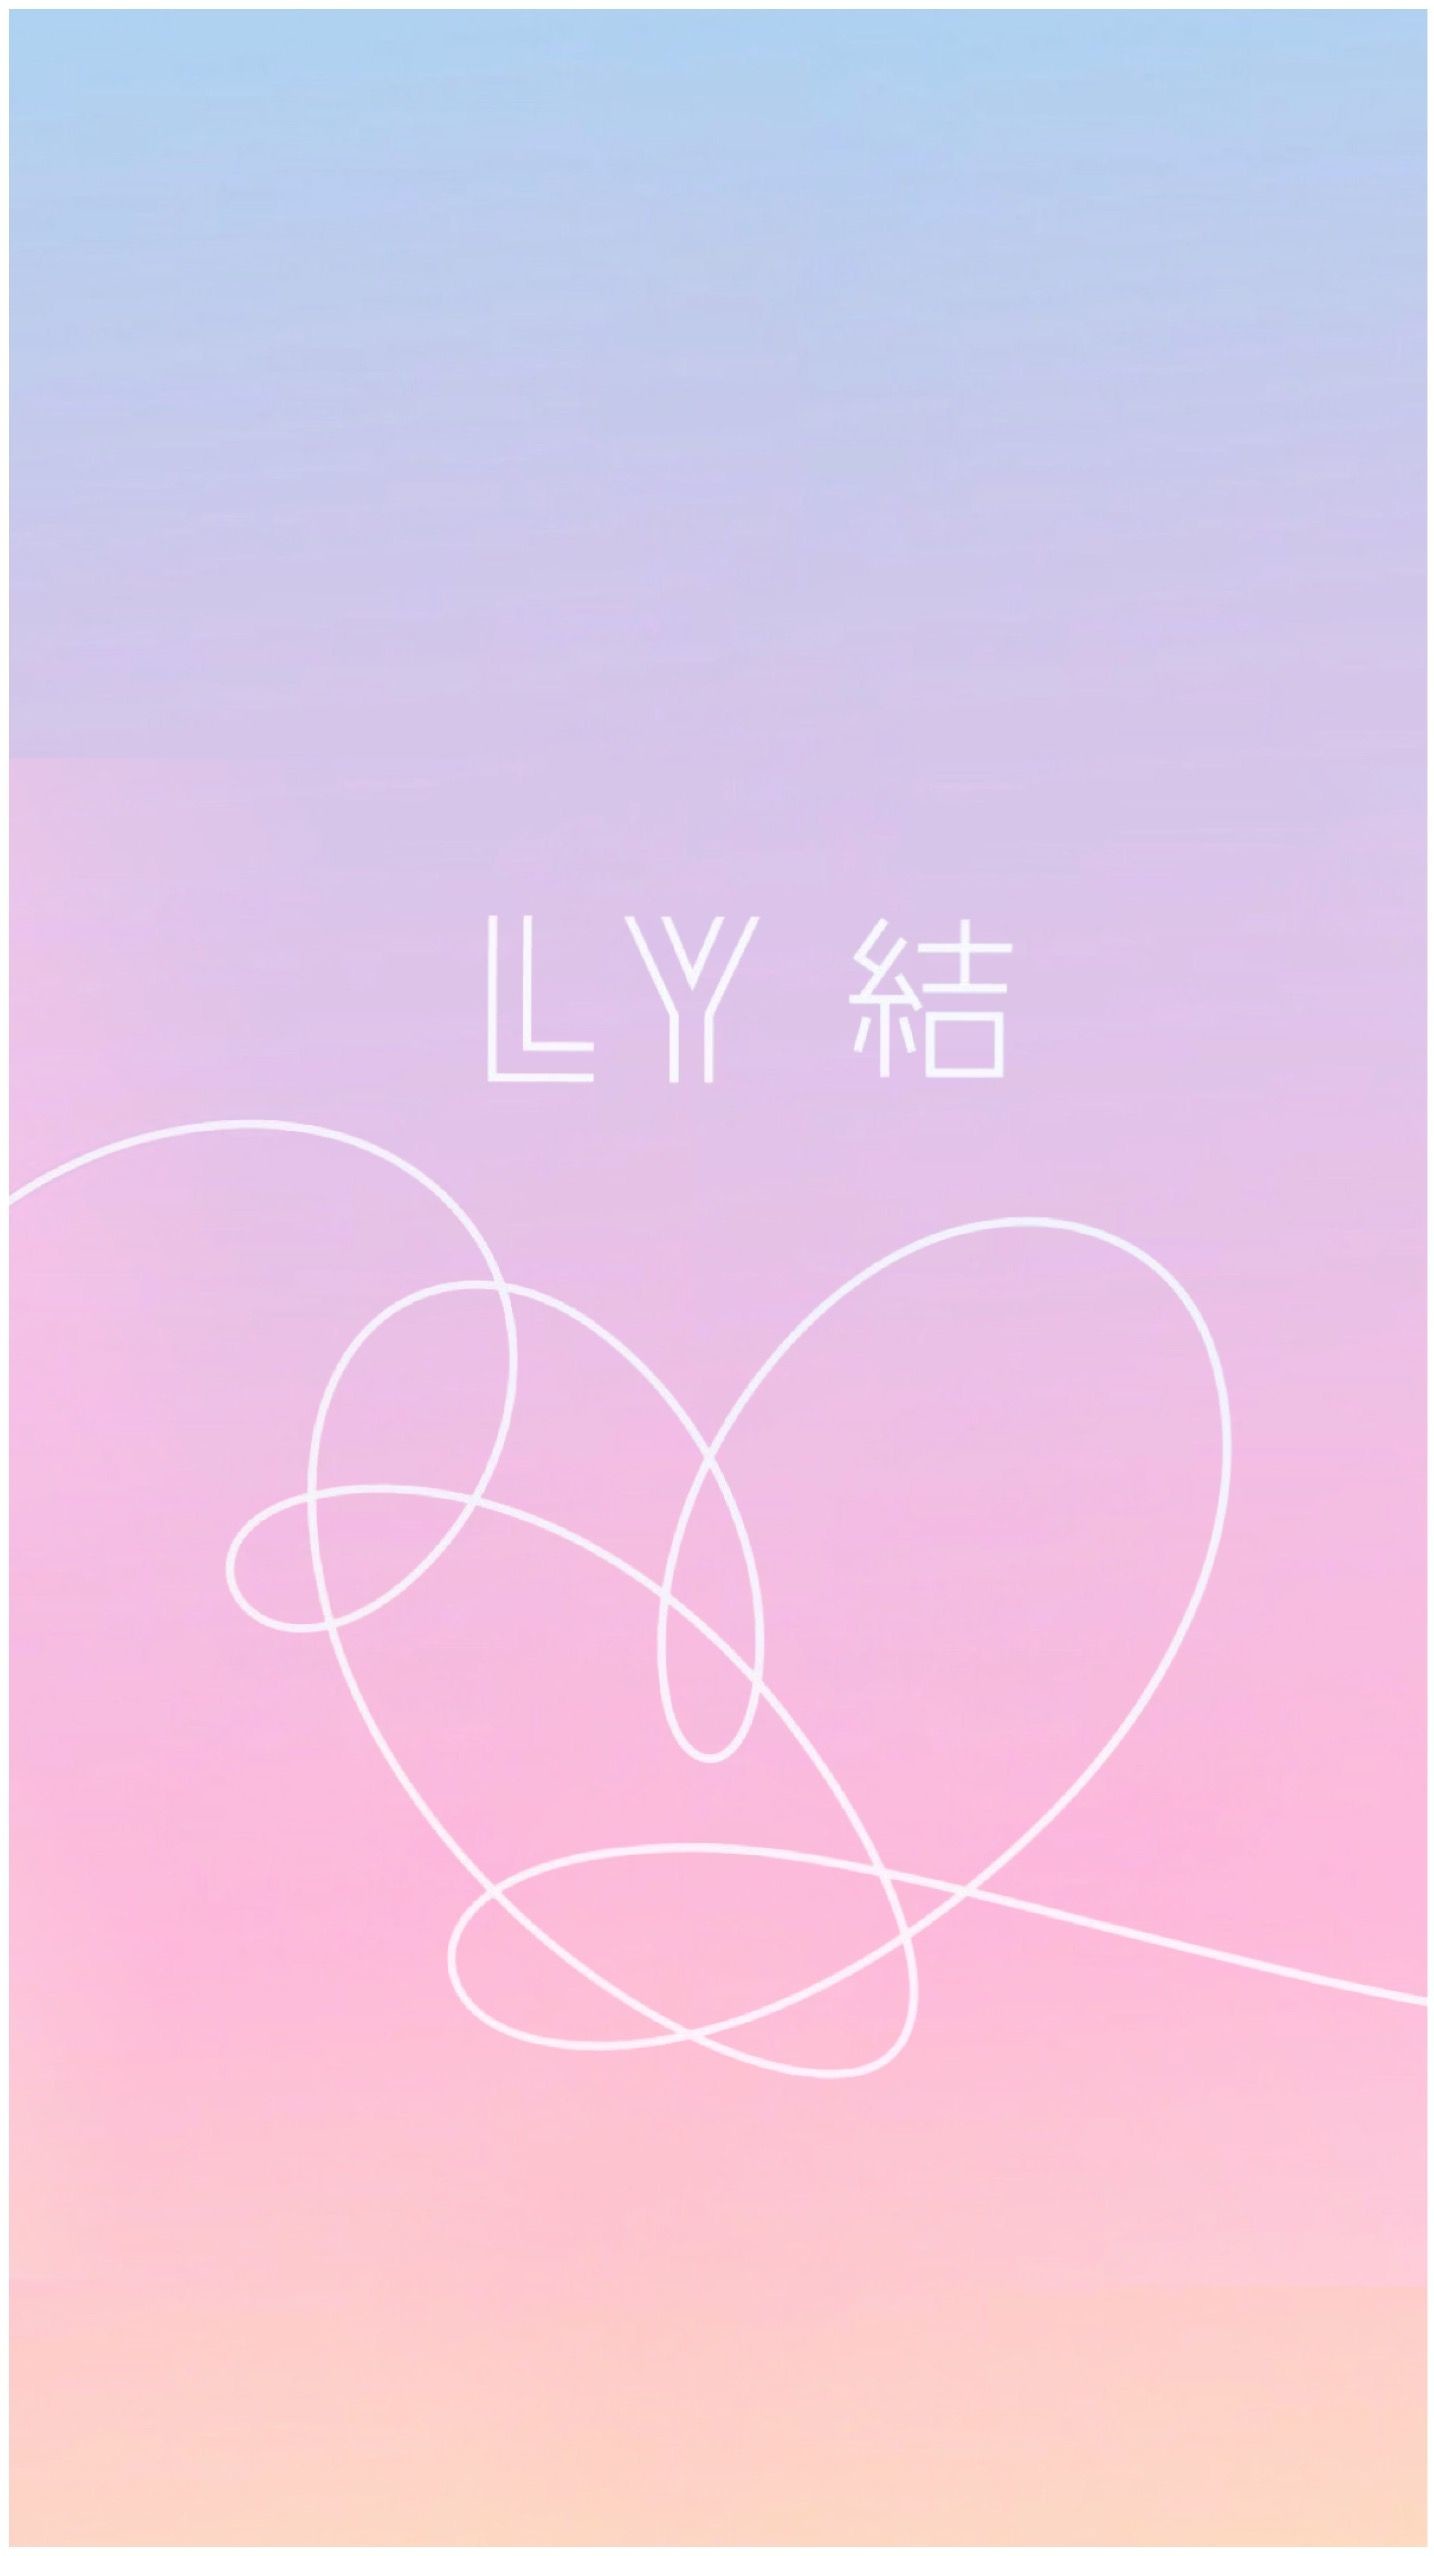 Share Your Bts Phone Backgrounds/wallpapers - Bts Ly Answer Background ...